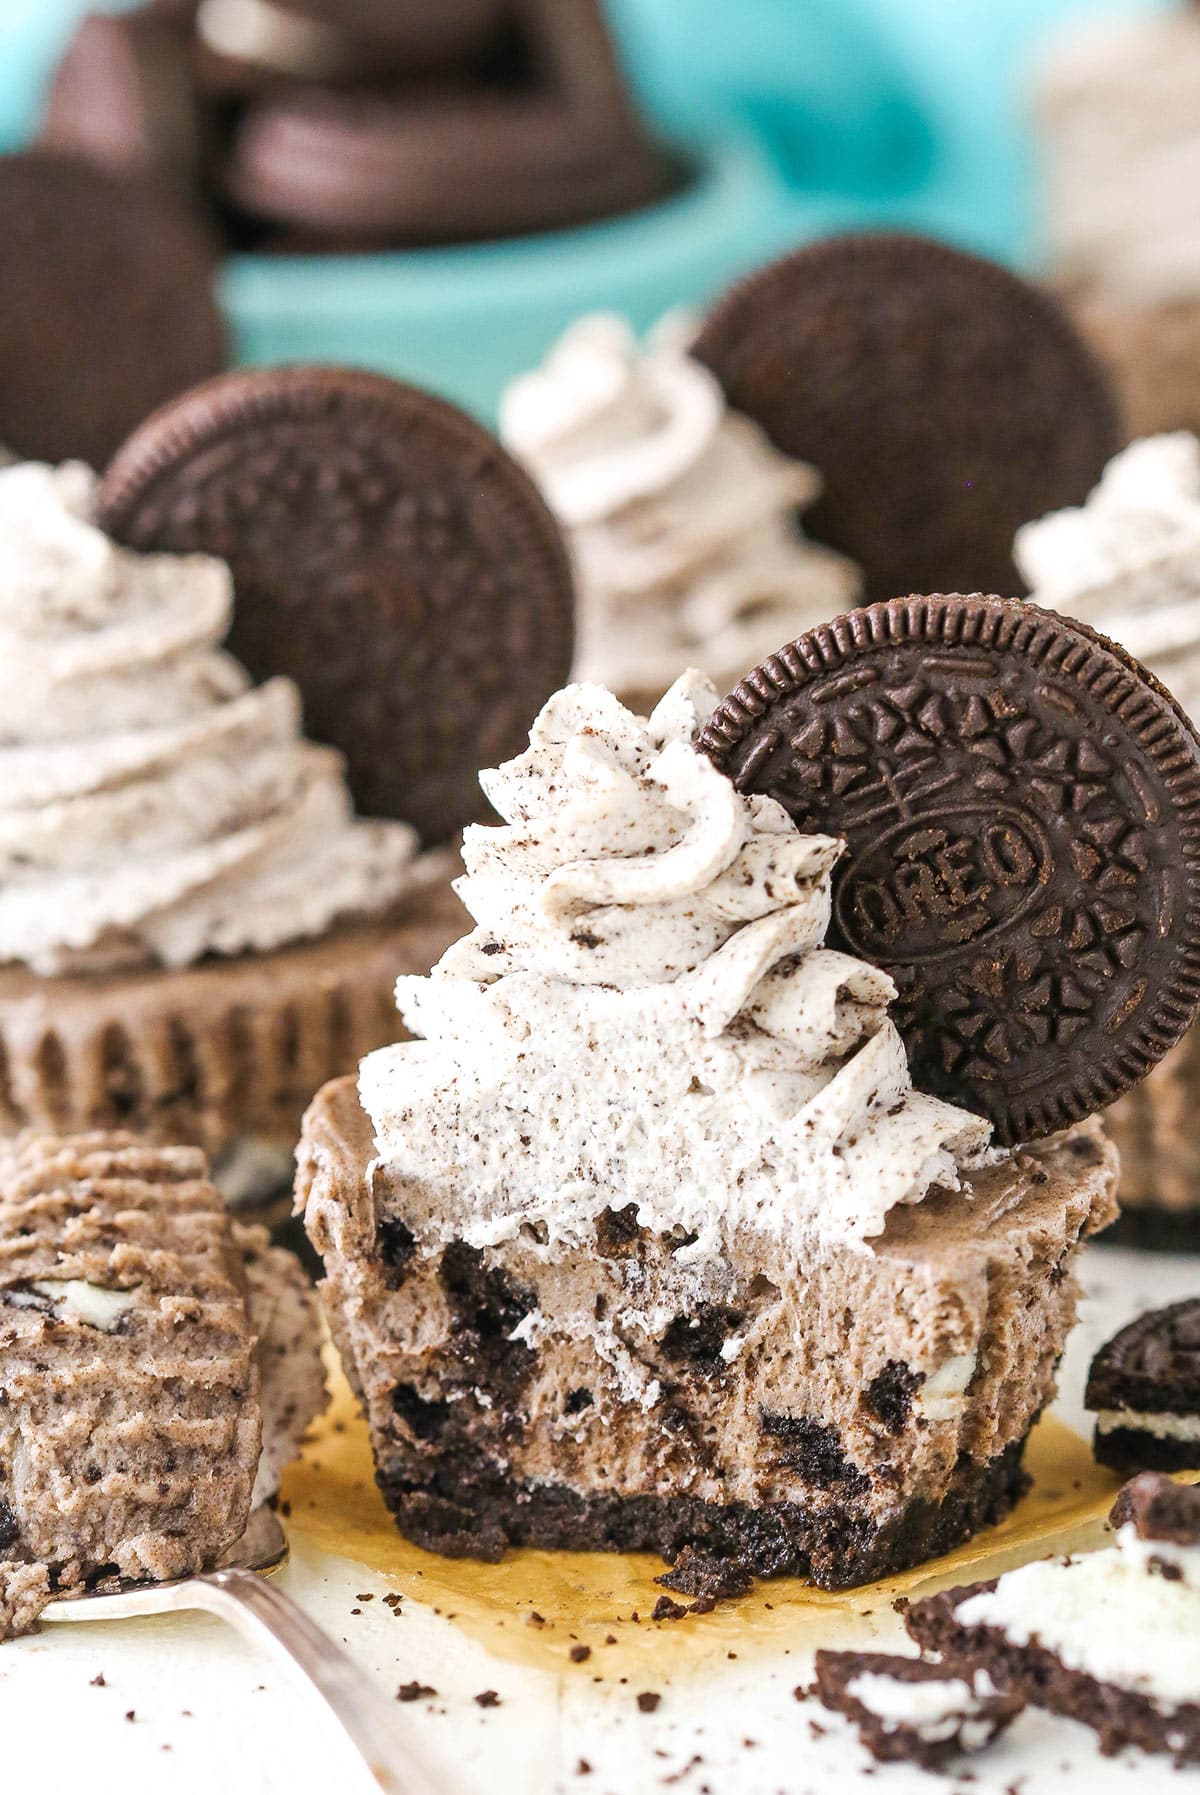 A no bake mini Oreo cheesecakes with a bite taken out of it surrounded by other no bake mini Oreo cheesecakes near a bowl of Oreos.